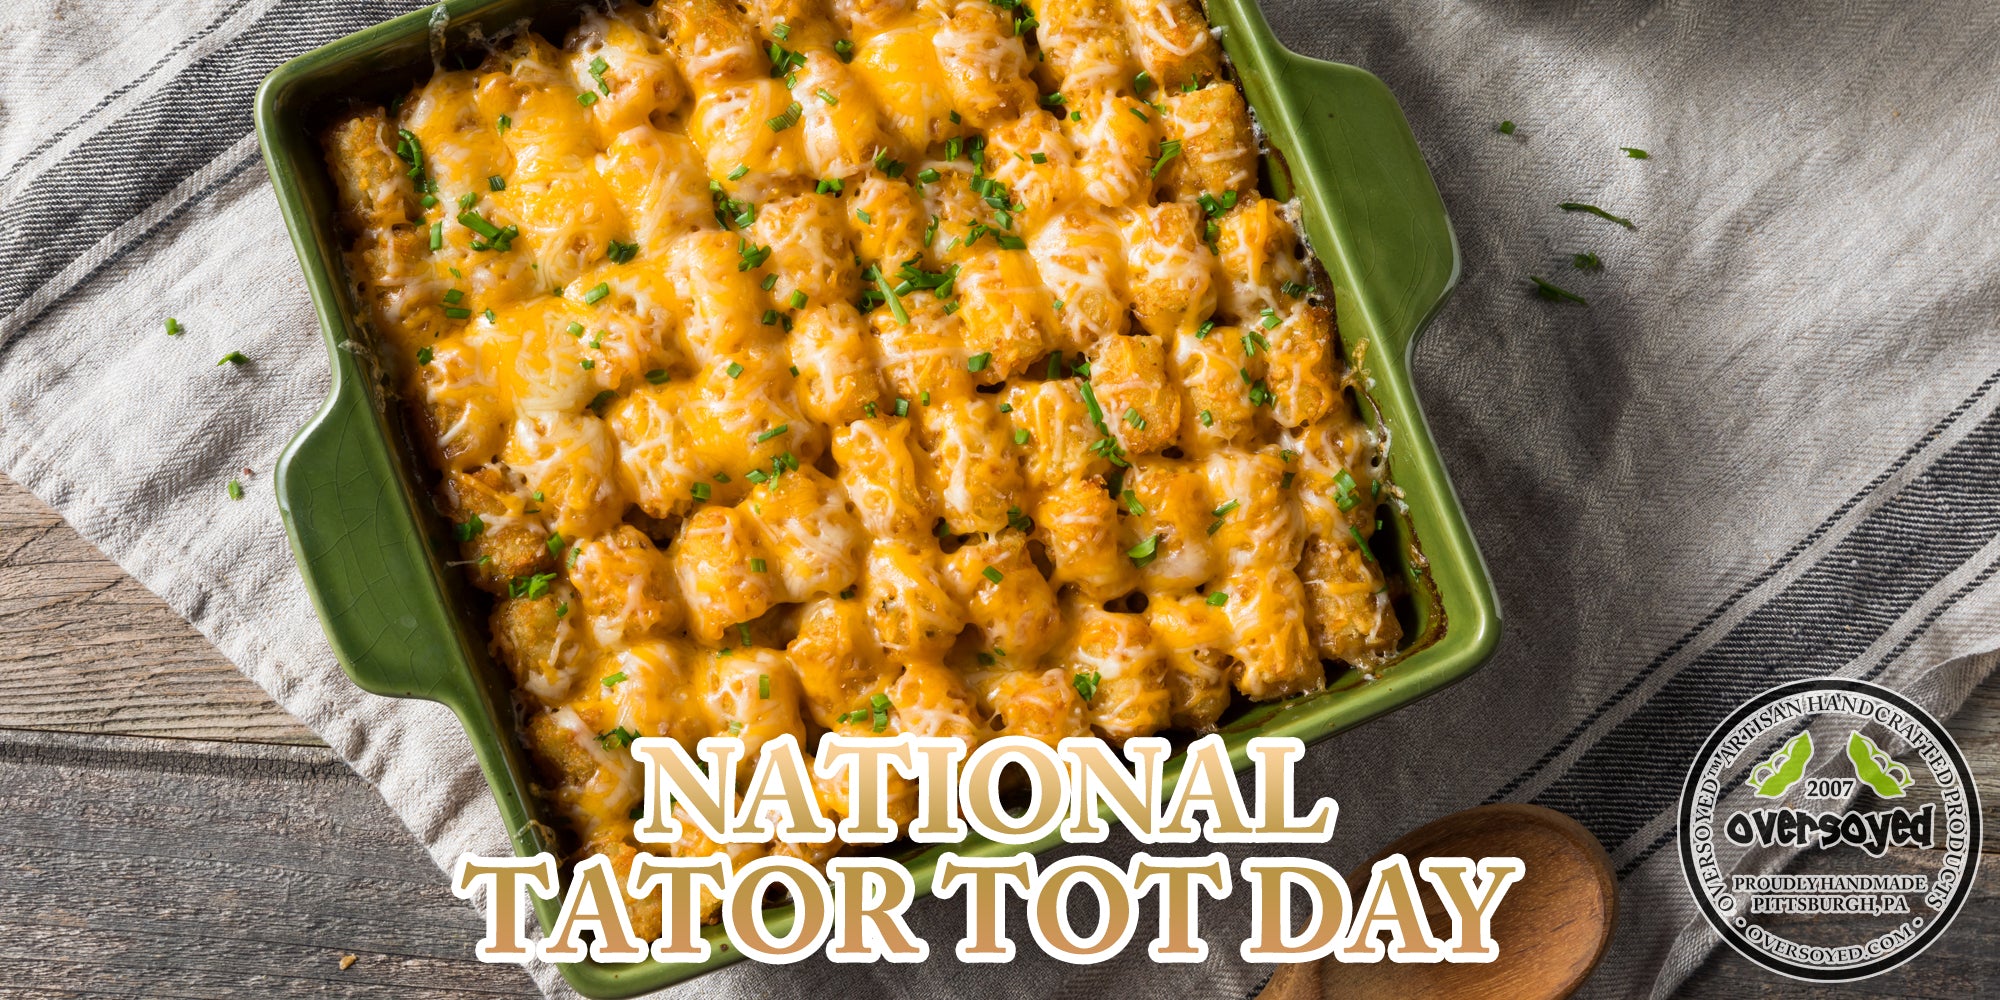 OverSoyed Artisan Handcrafted Products - National Tator Tot Day - Recipe - Minnesota Hot Dish